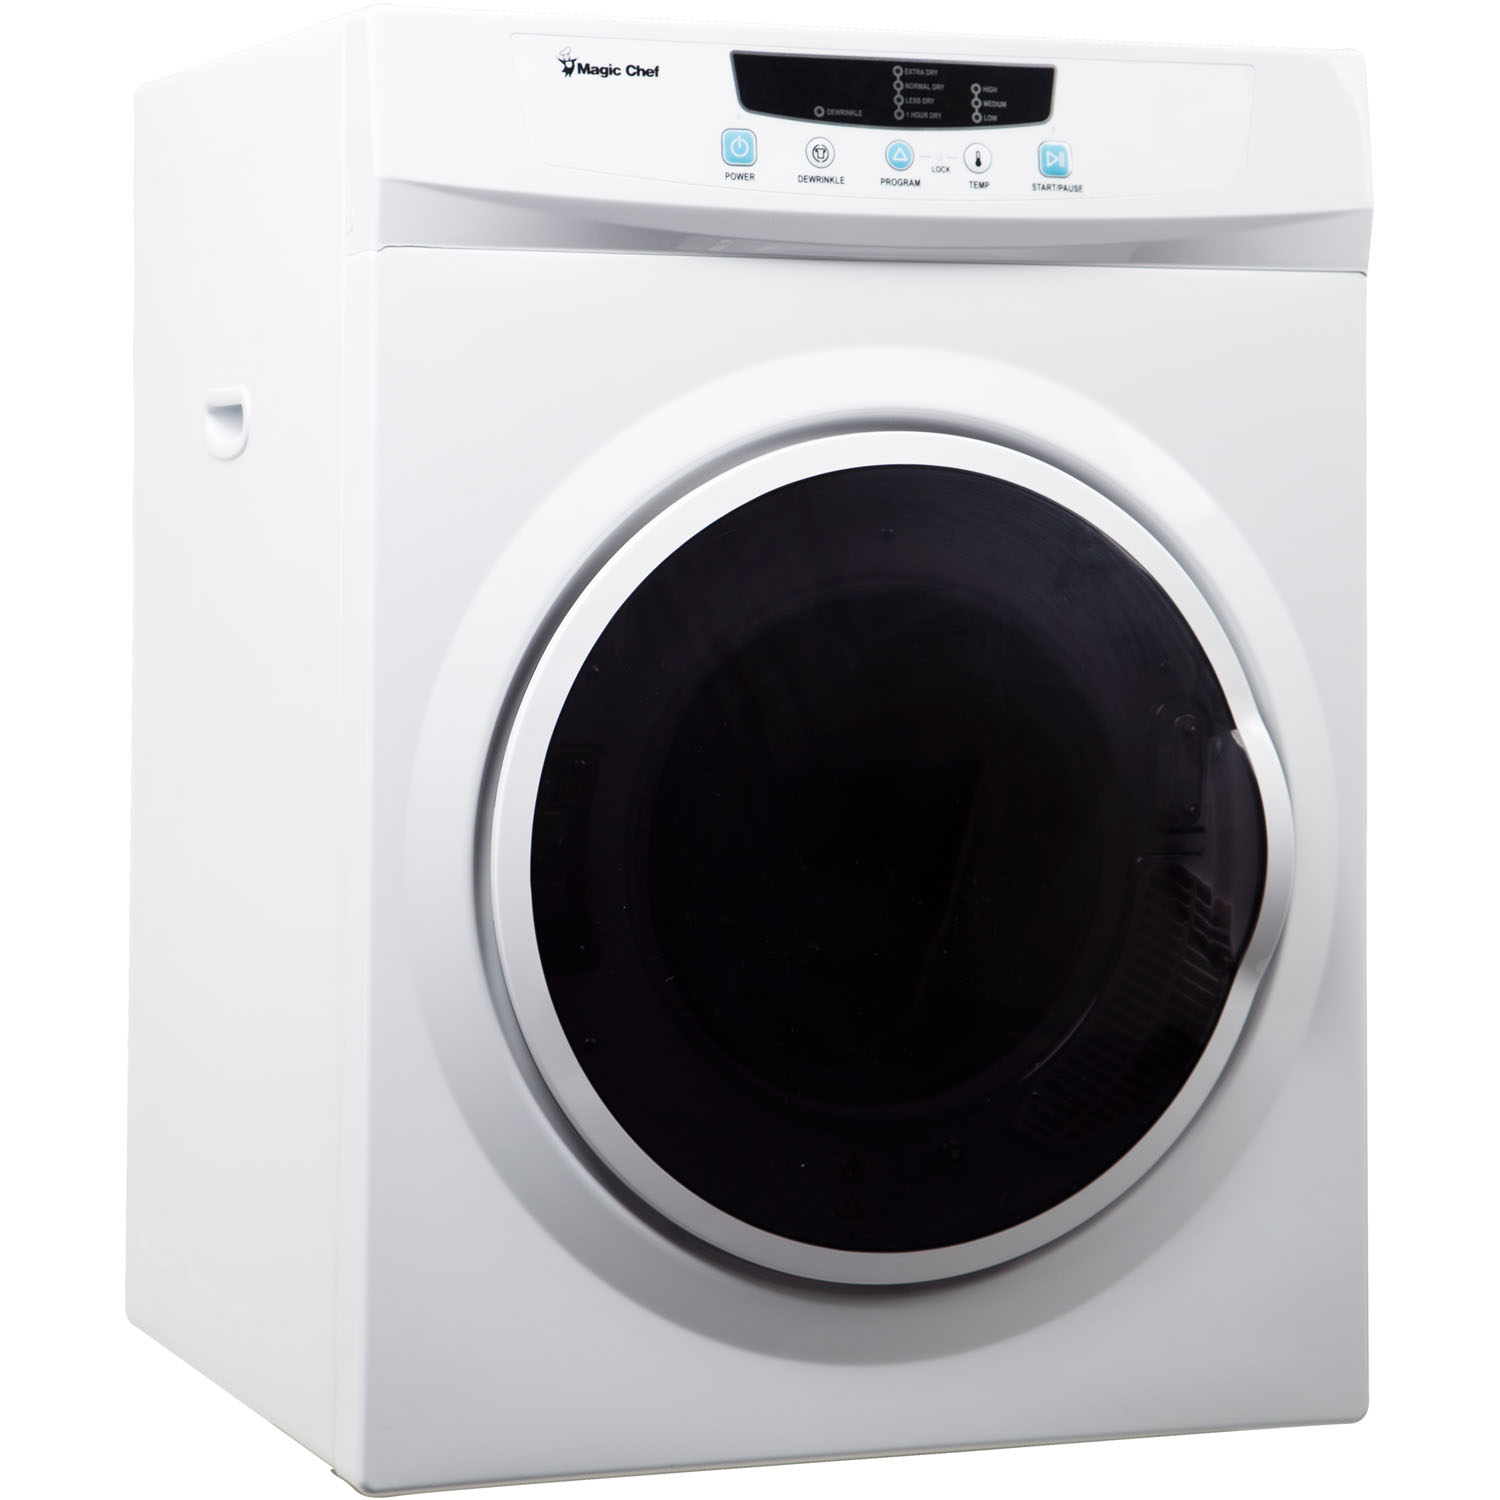 Magic Chef 3.5 cu. ft. Compact Electric Dryer, White - image 2 of 7